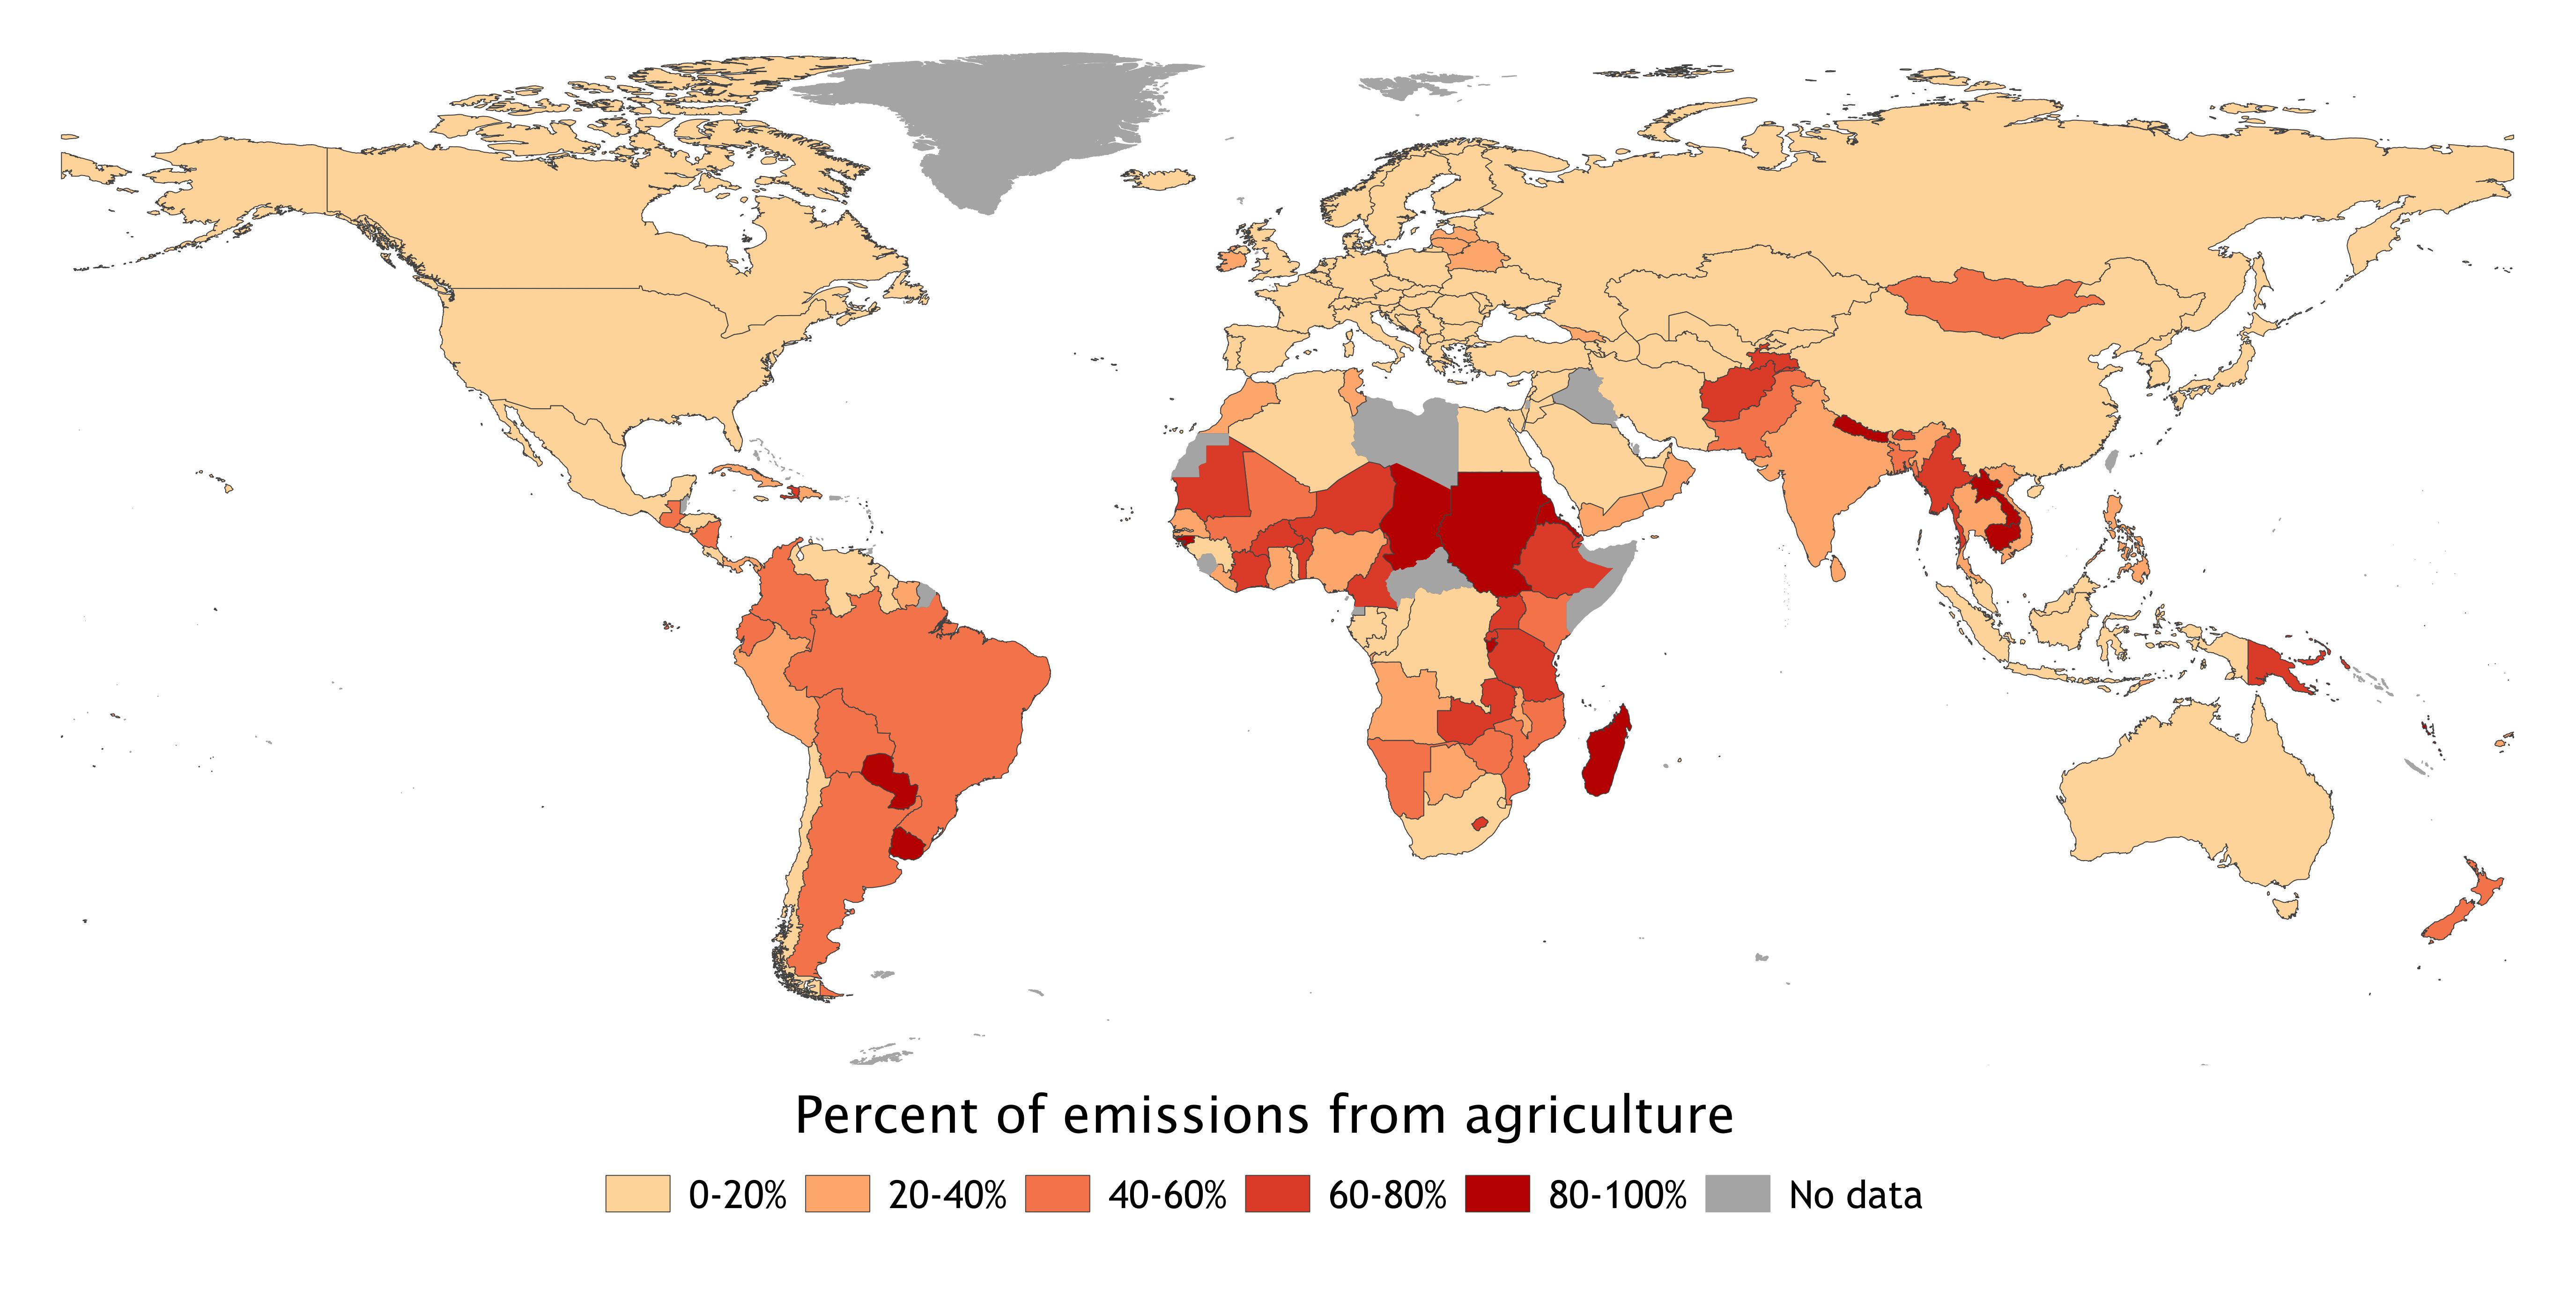 Figure 1.1 a) Total agricultural GHG emissions (GtCO2e yr-1) by country (CH4 and N2O only). Data are average of emissions figures from FAOSTAT database of GHG emissions from agriculture in 2010, EPA global emission estimates for 2010 and national reports to the United Nations Framework Convention on Climate Change (UNFCCC). If a country had not submitted a report to the UNFCC since the year 2000, we used only FAOSTAT and EPA data. b) Percent of national emissions that come from agriculture, not including land use, land use change and forestry (LULUCF). Data from national reports to the UNFCCC